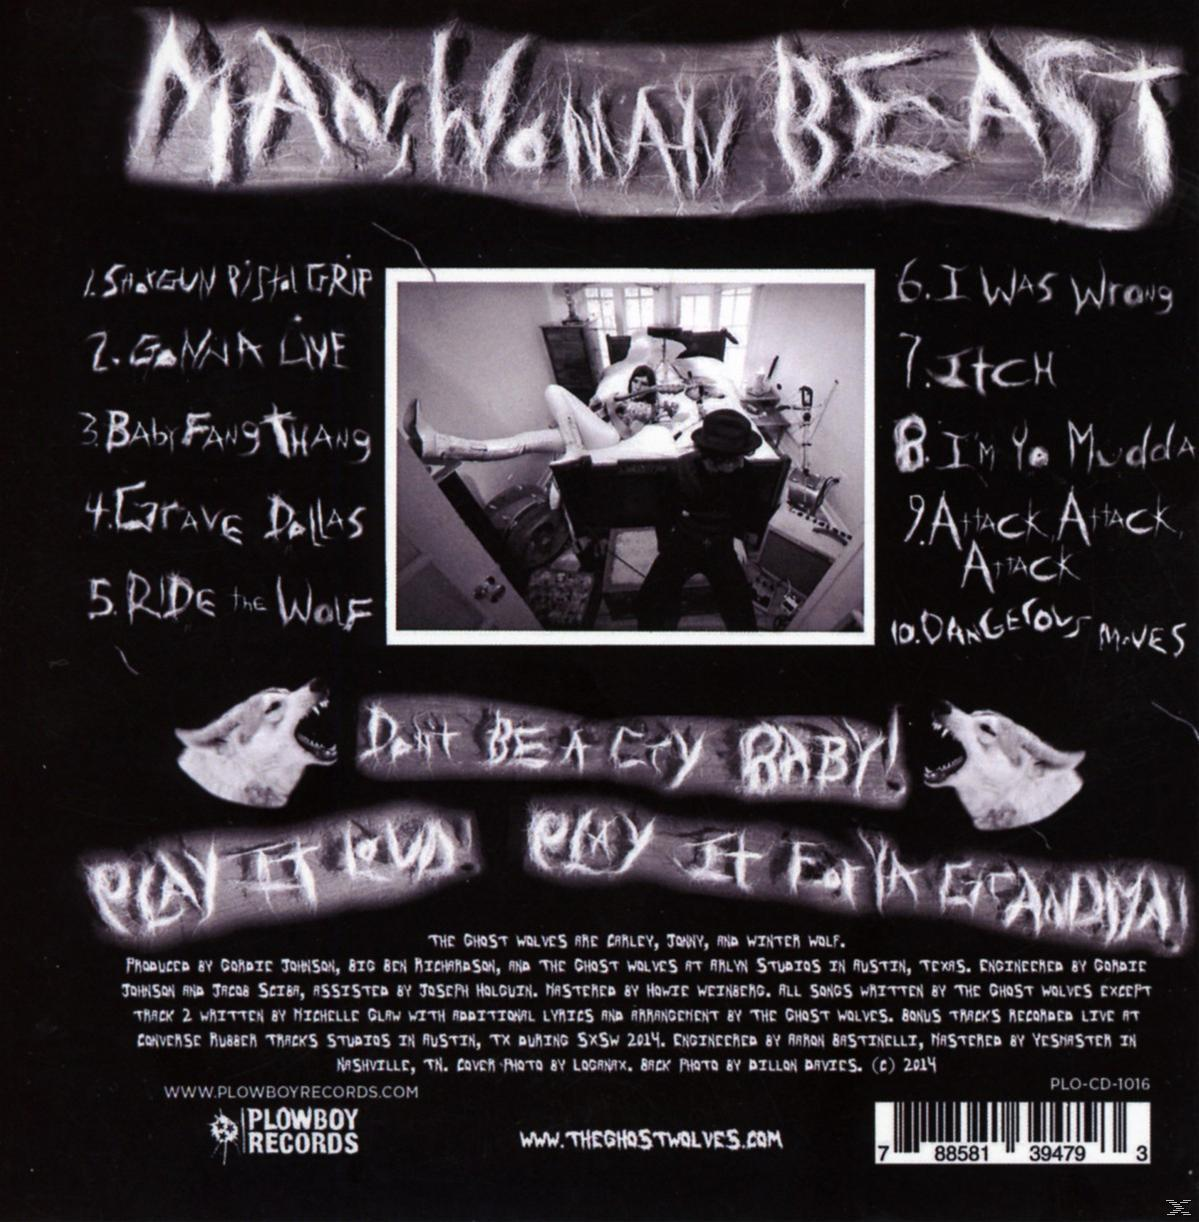 The Ghost Wolves - Man, (CD) - Beast Woman